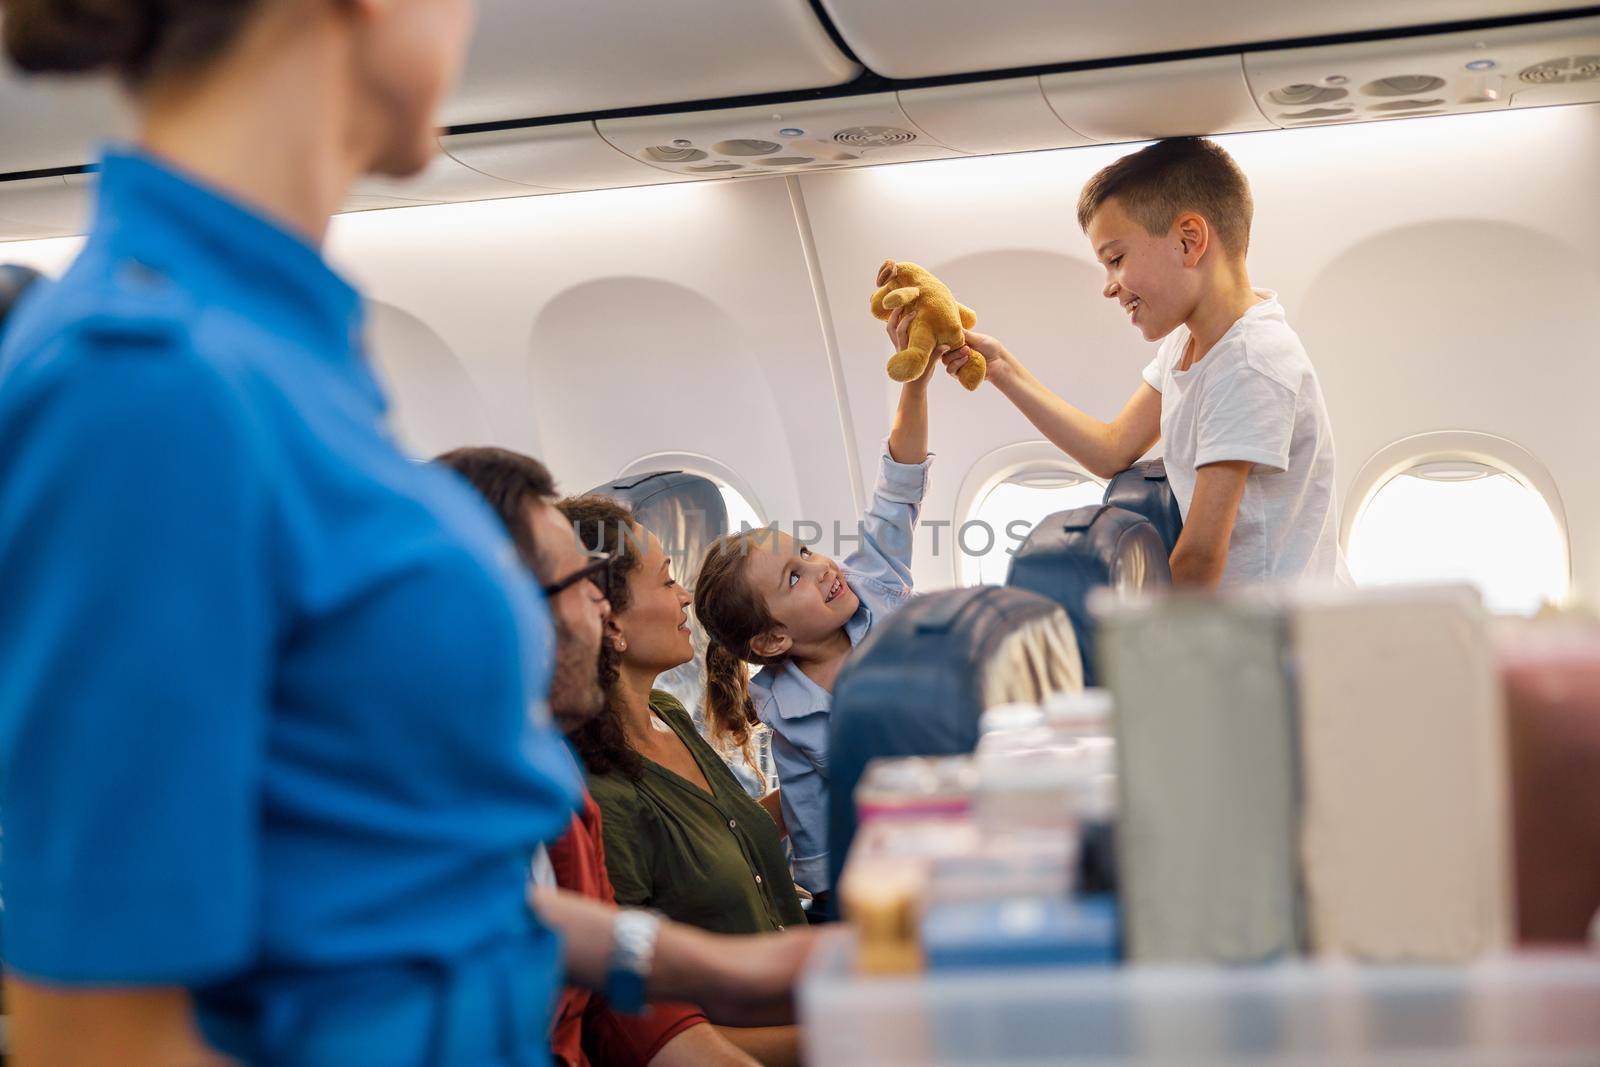 Two happy kids playing with a toy during flight. Family traveling together by plane by Yaroslav_astakhov